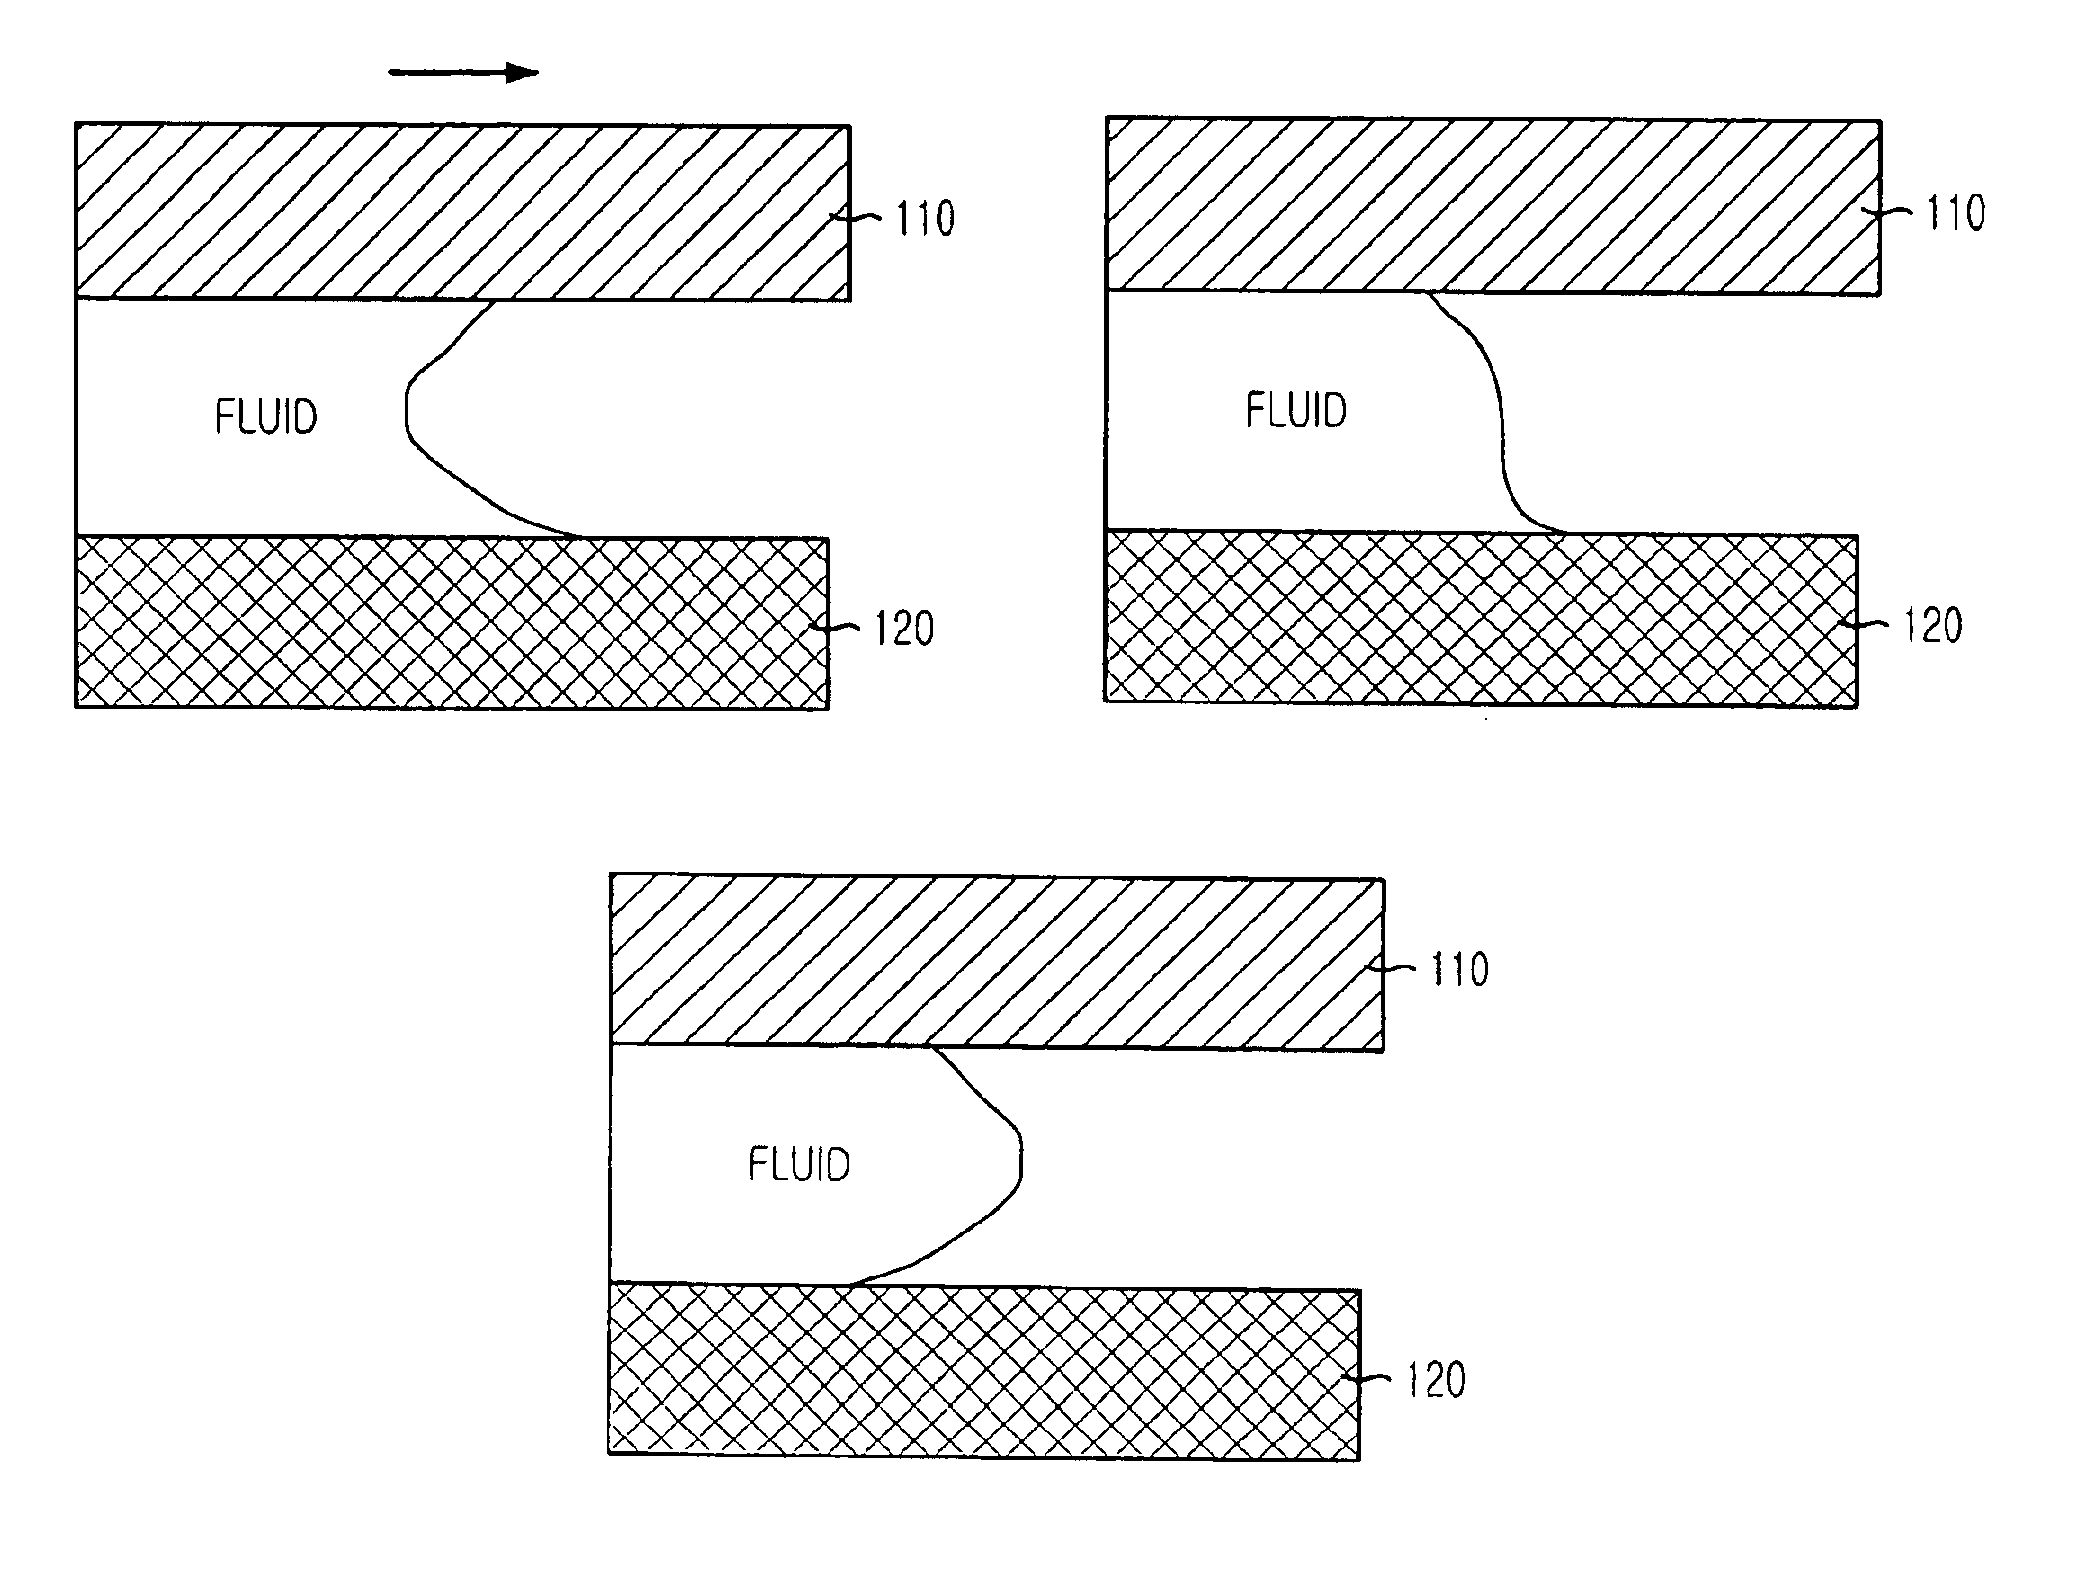 Micro fluidic device for controlling flow time of micro fluid